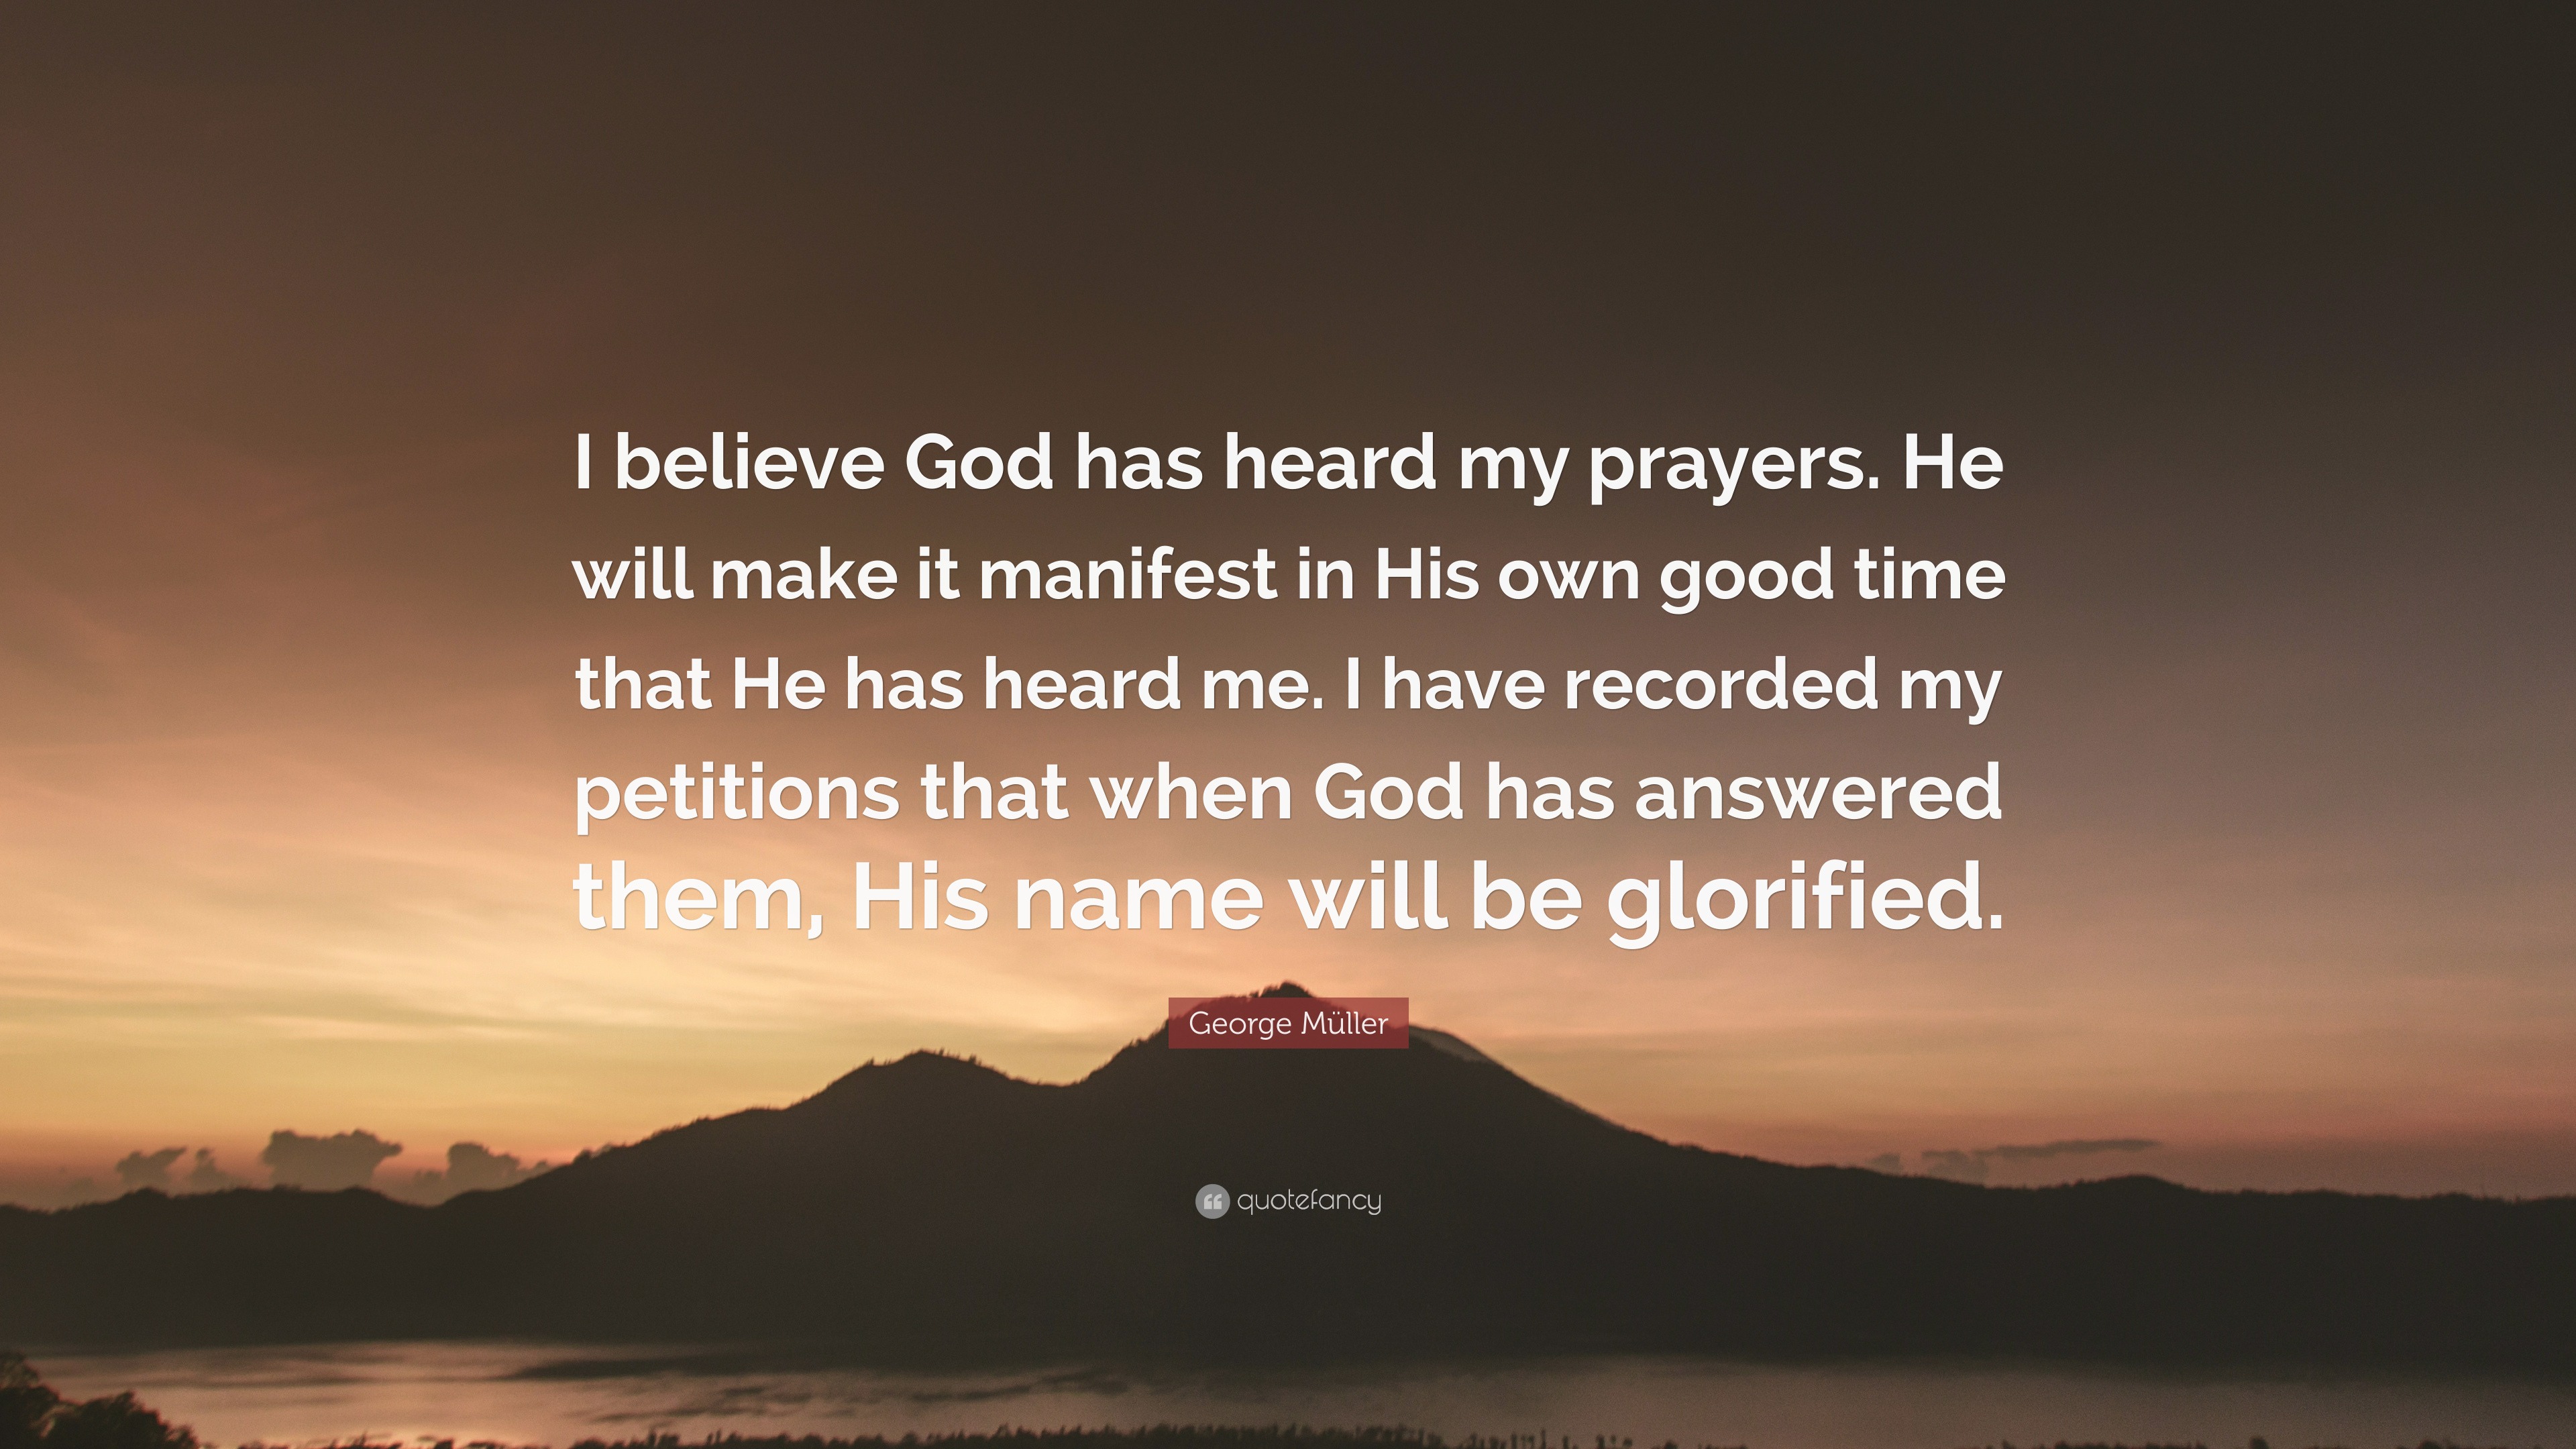 George Müller Quote: “I Believe God Has Heard My Prayers. He Will Make It Manifest In His Own Good Time That He Has Heard Me. I Have Recorded ...”